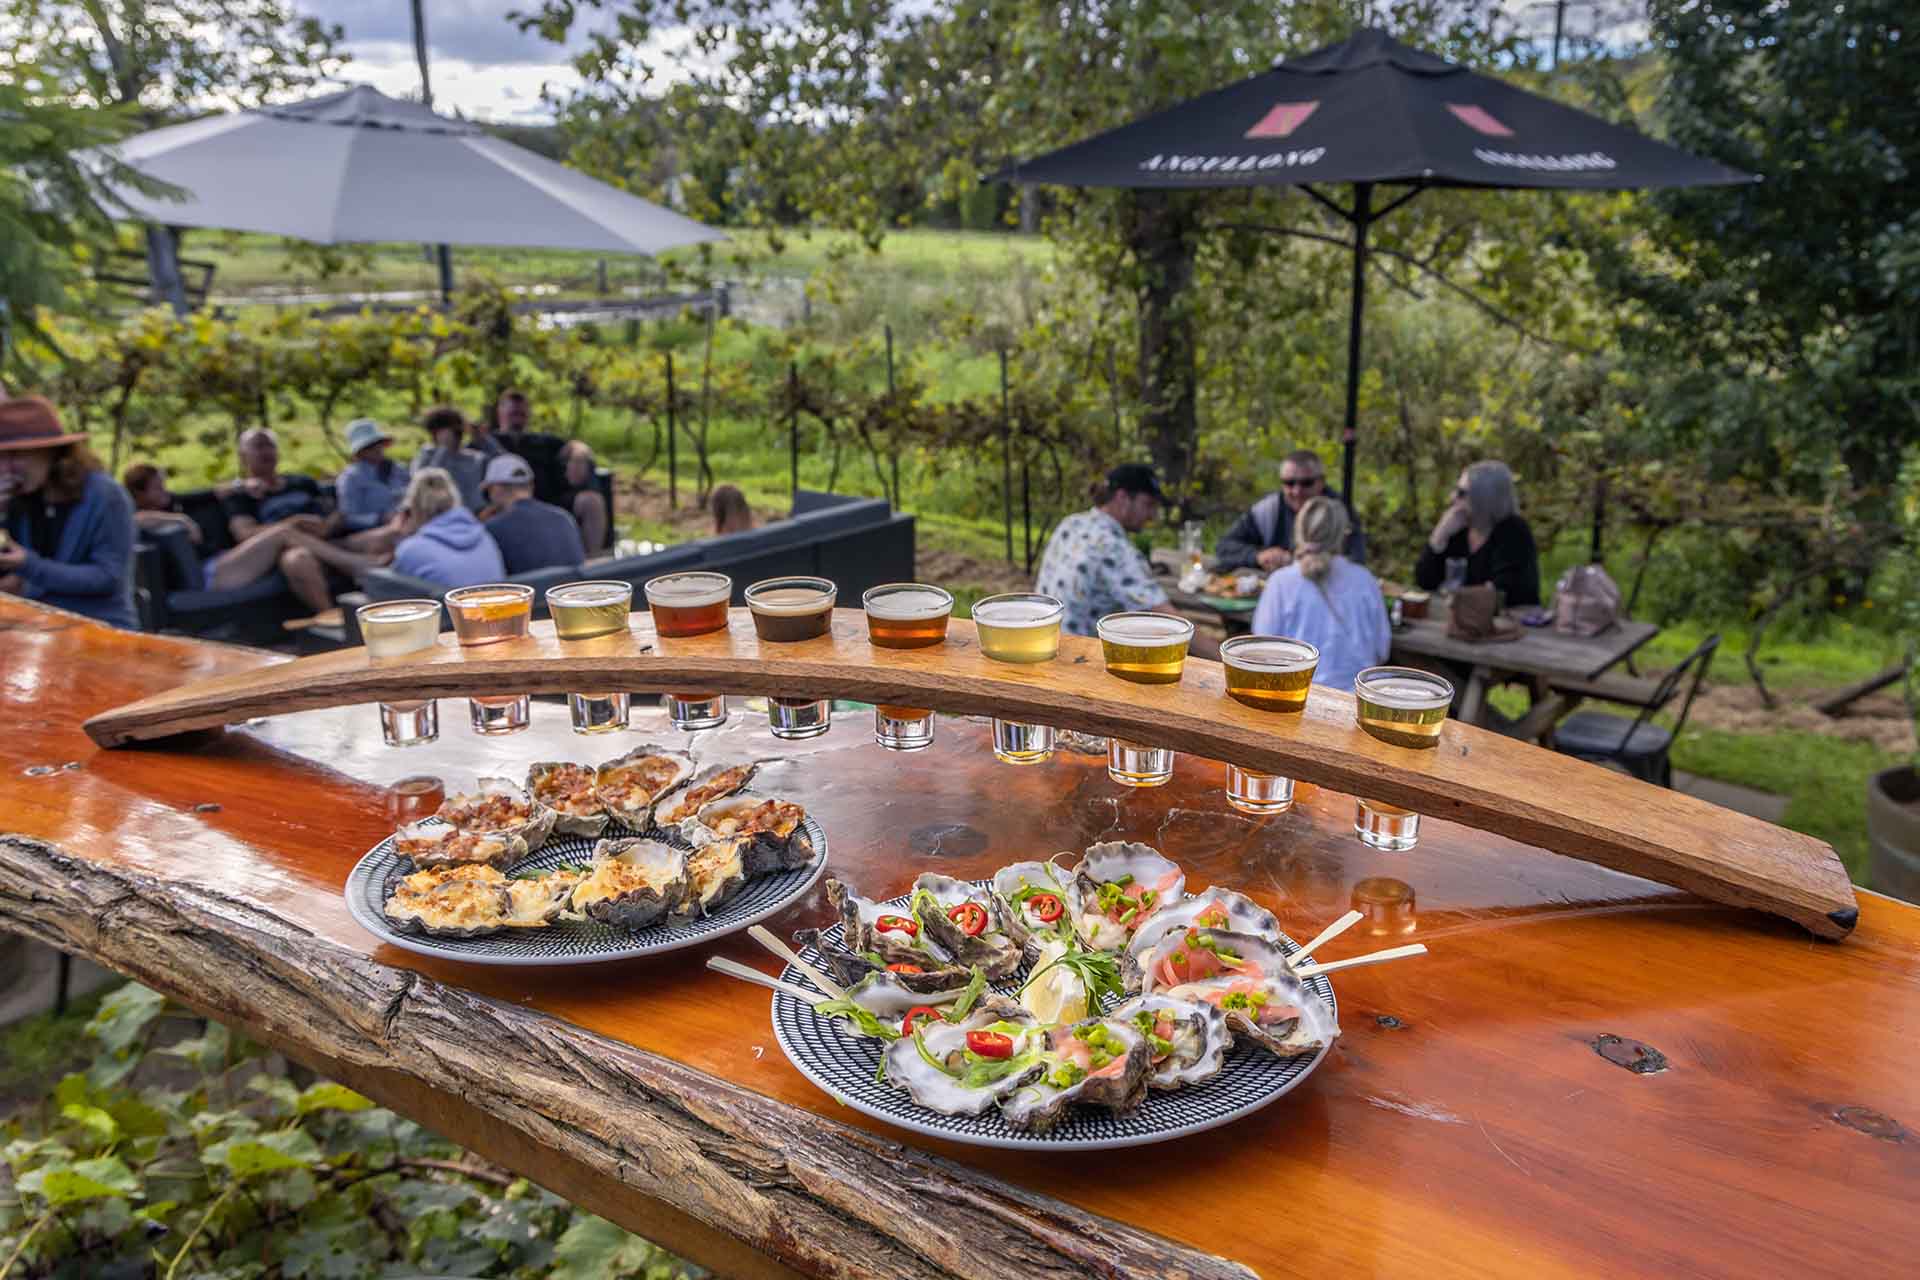 Longstocking Brewery and Oyster Bar in Pambula, NSW